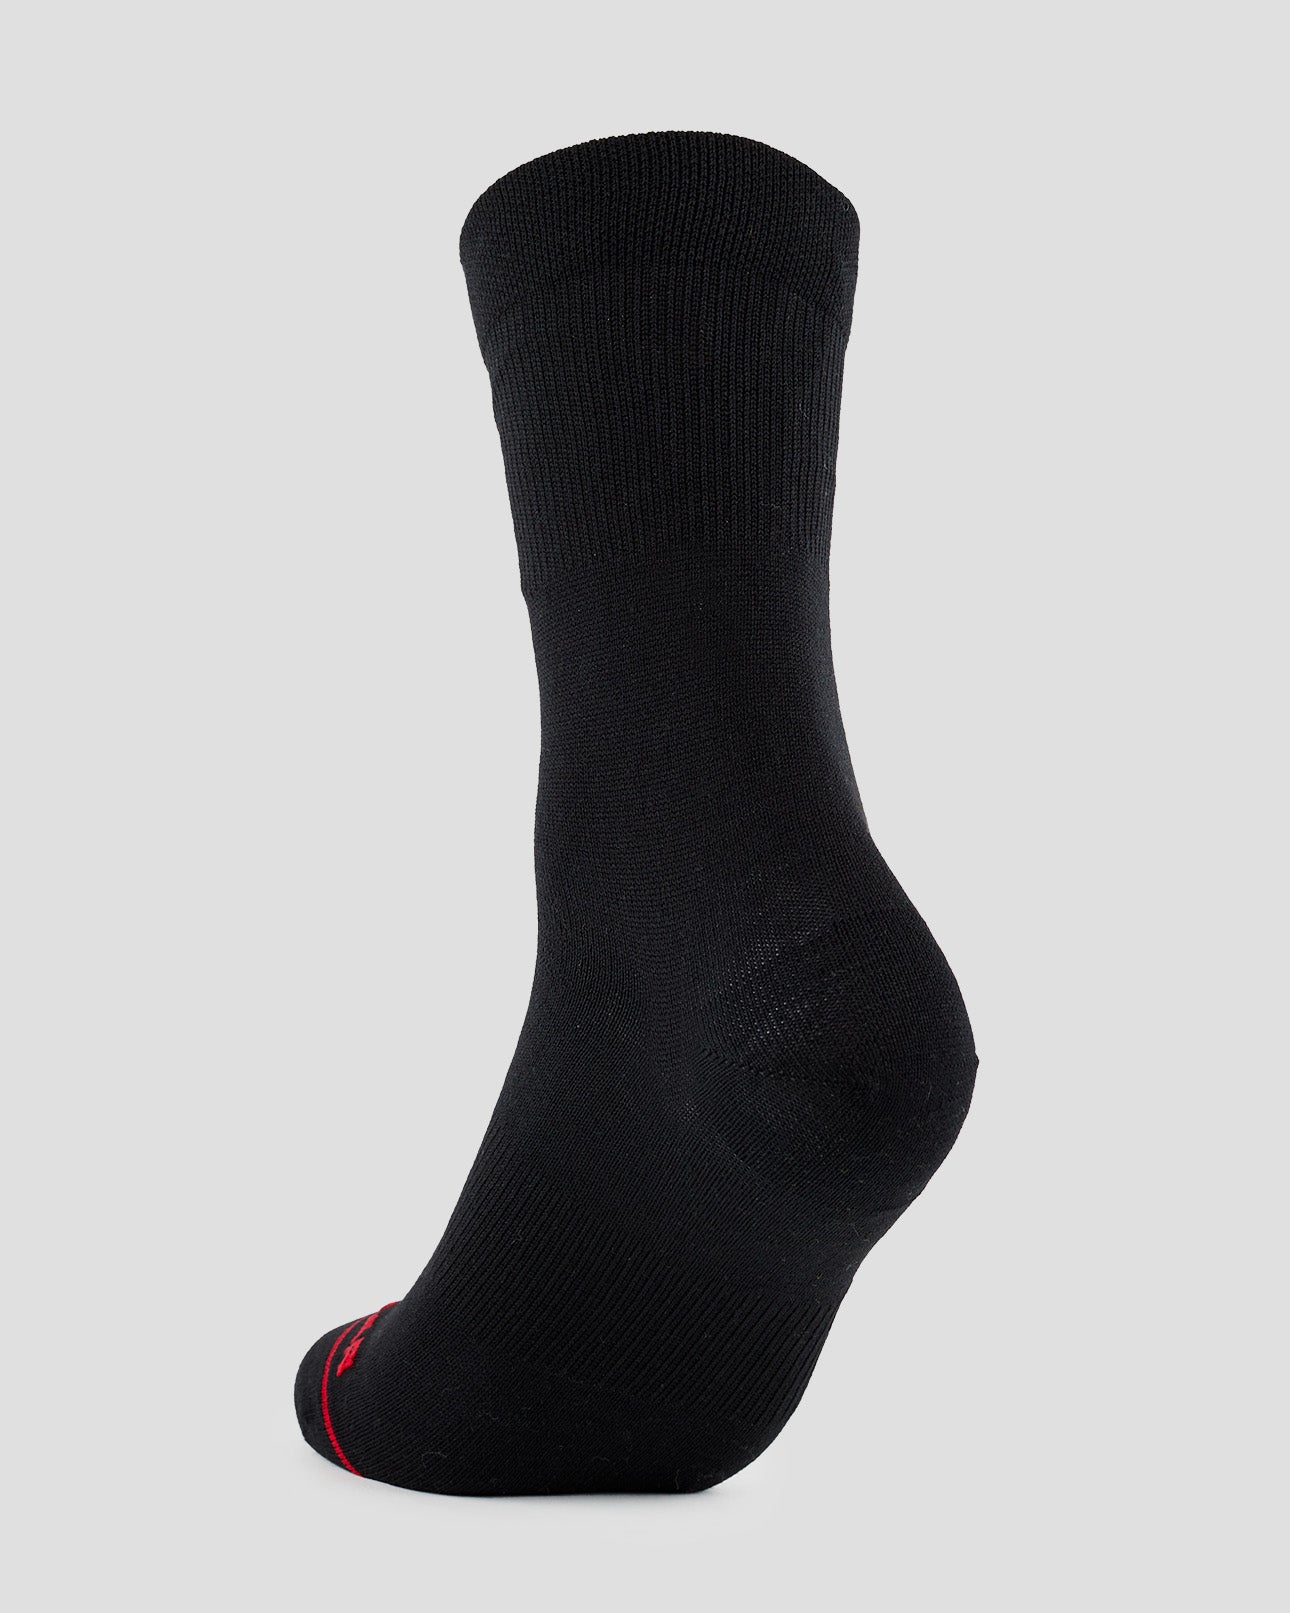 Adults' Midweight Baselayer Socks (2 Pairs) | Color: Black